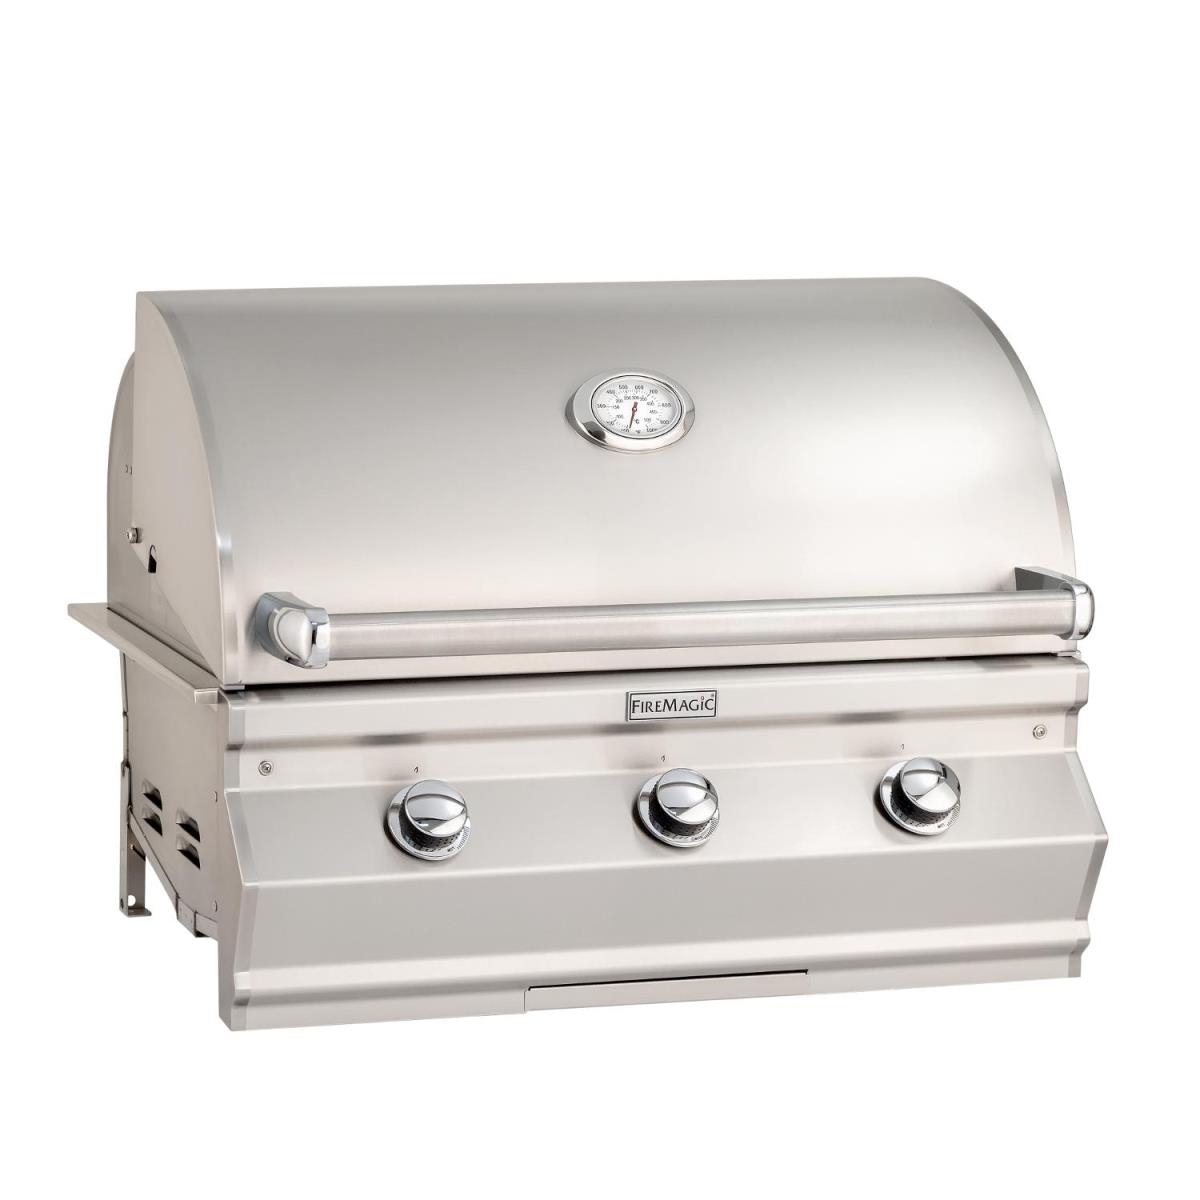 Fire Magic C540i-RT1N 30 x 18 in. Built-in Natural Gas Grill with Analog Thermometer